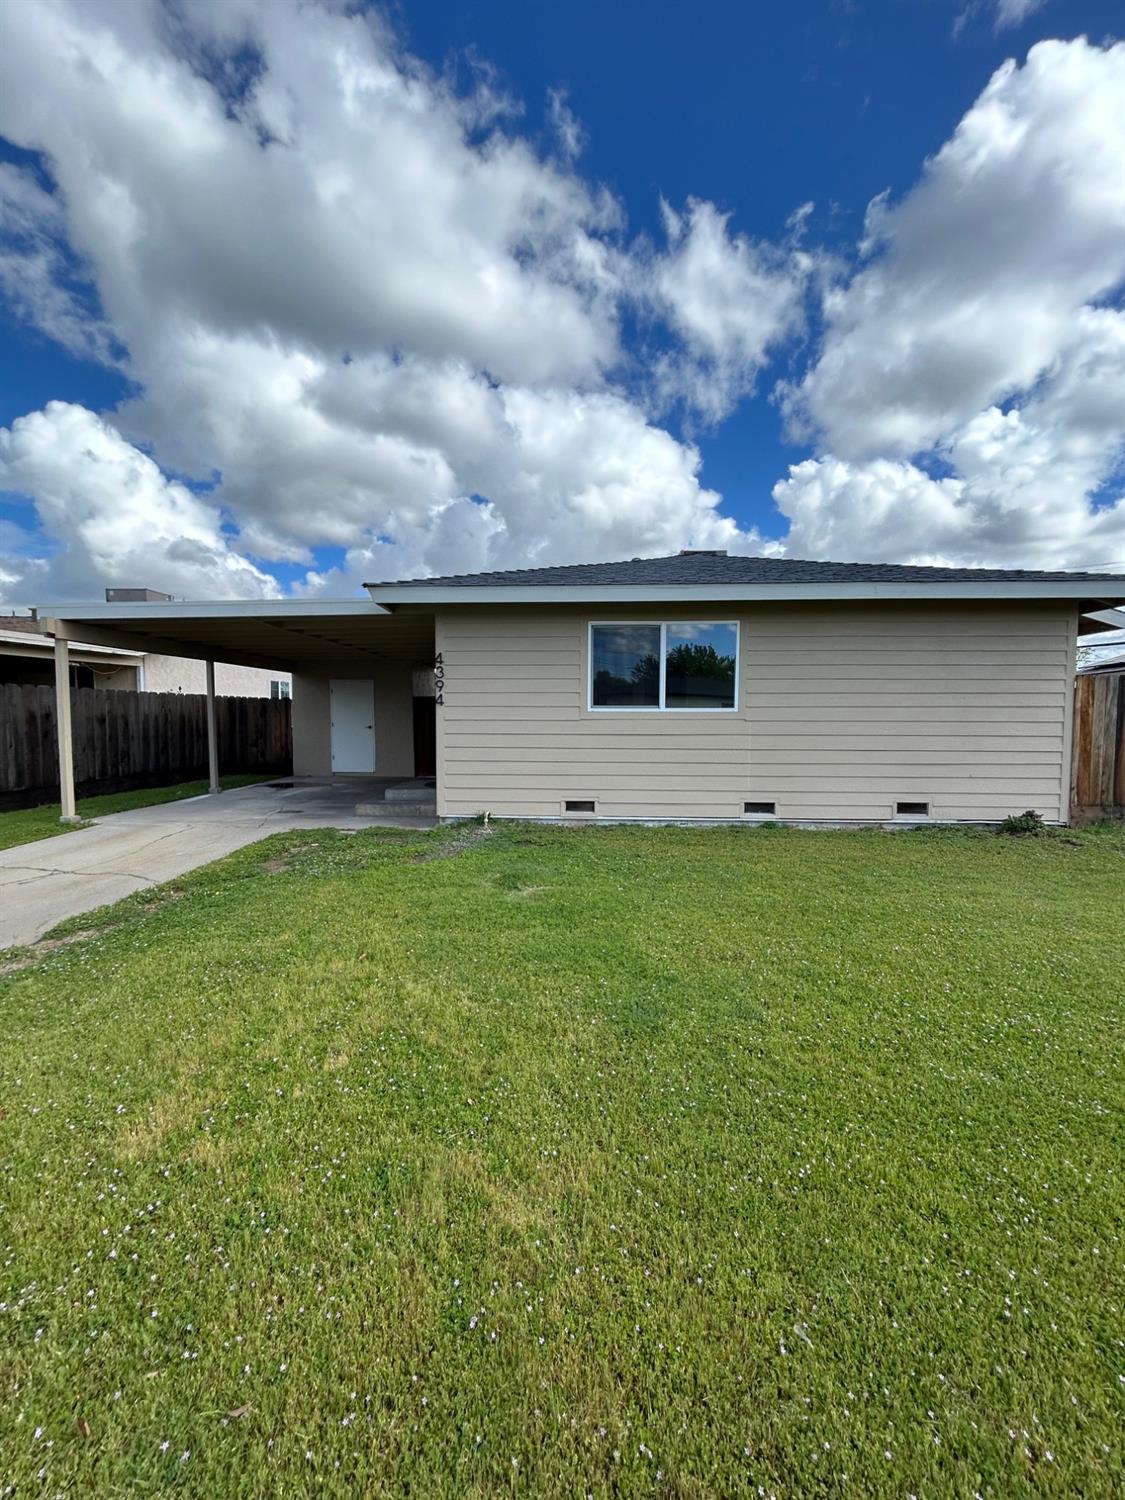 Photo of 4394 N Holt Ave in Fresno, CA